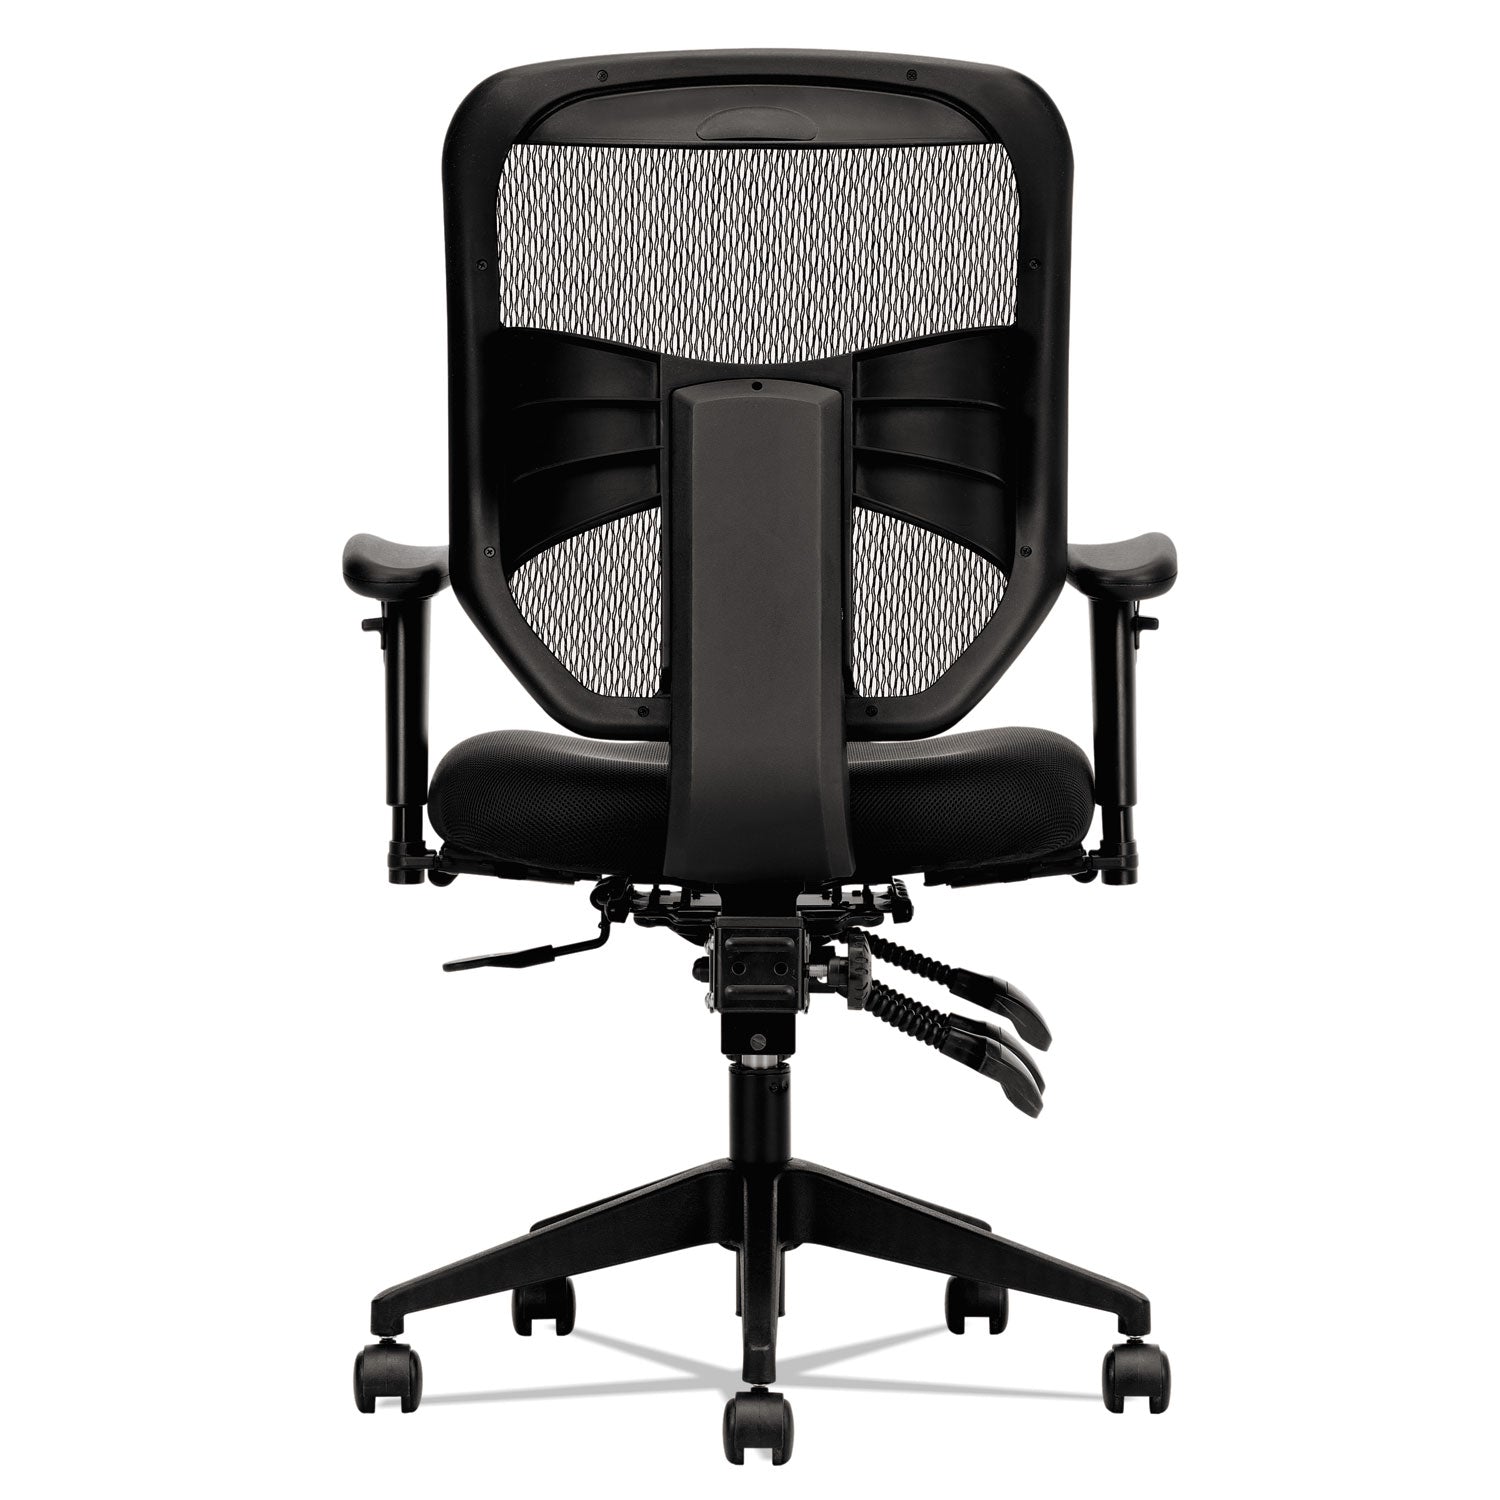 VL532 Mesh High-Back Task Chair, Supports Up to 250 lb, 17" to 20.5" Seat Height, Black - 